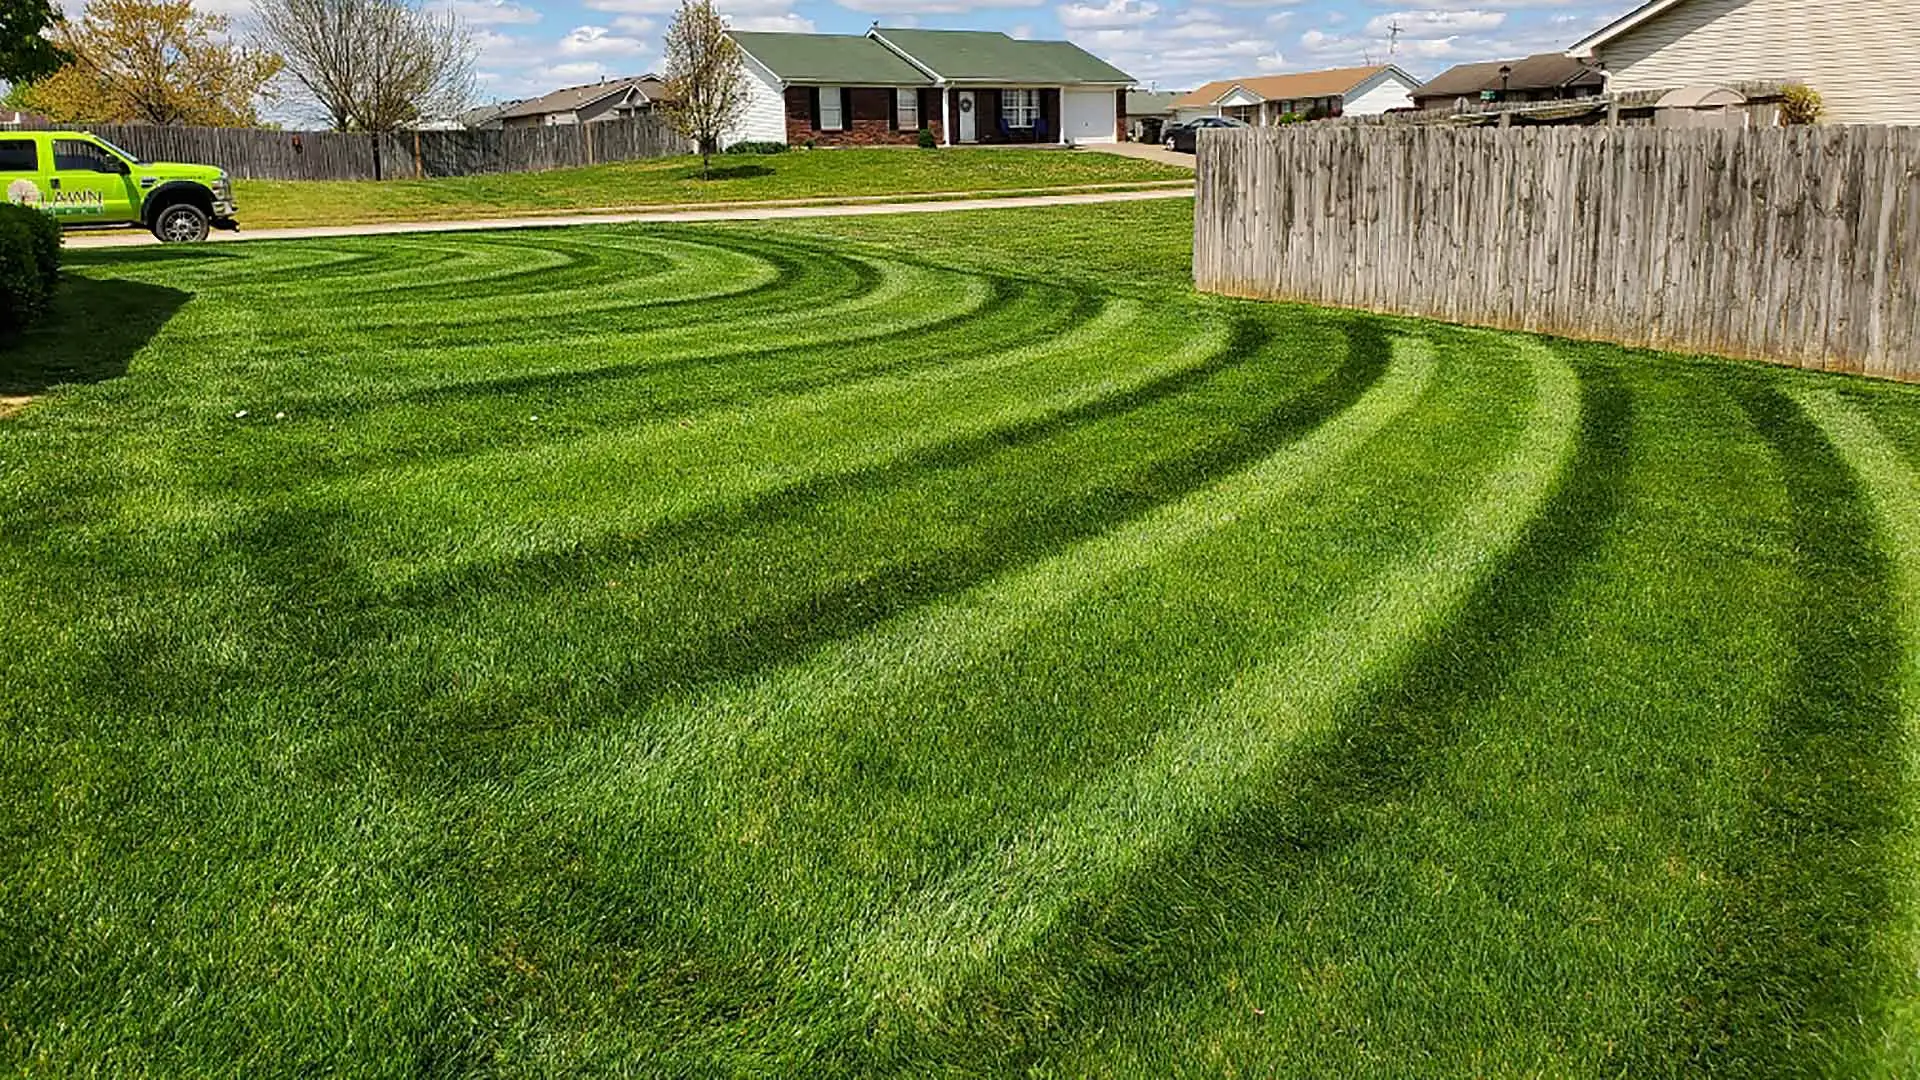 Bright, green grass with fresh mowing lines in New Albany, IN.